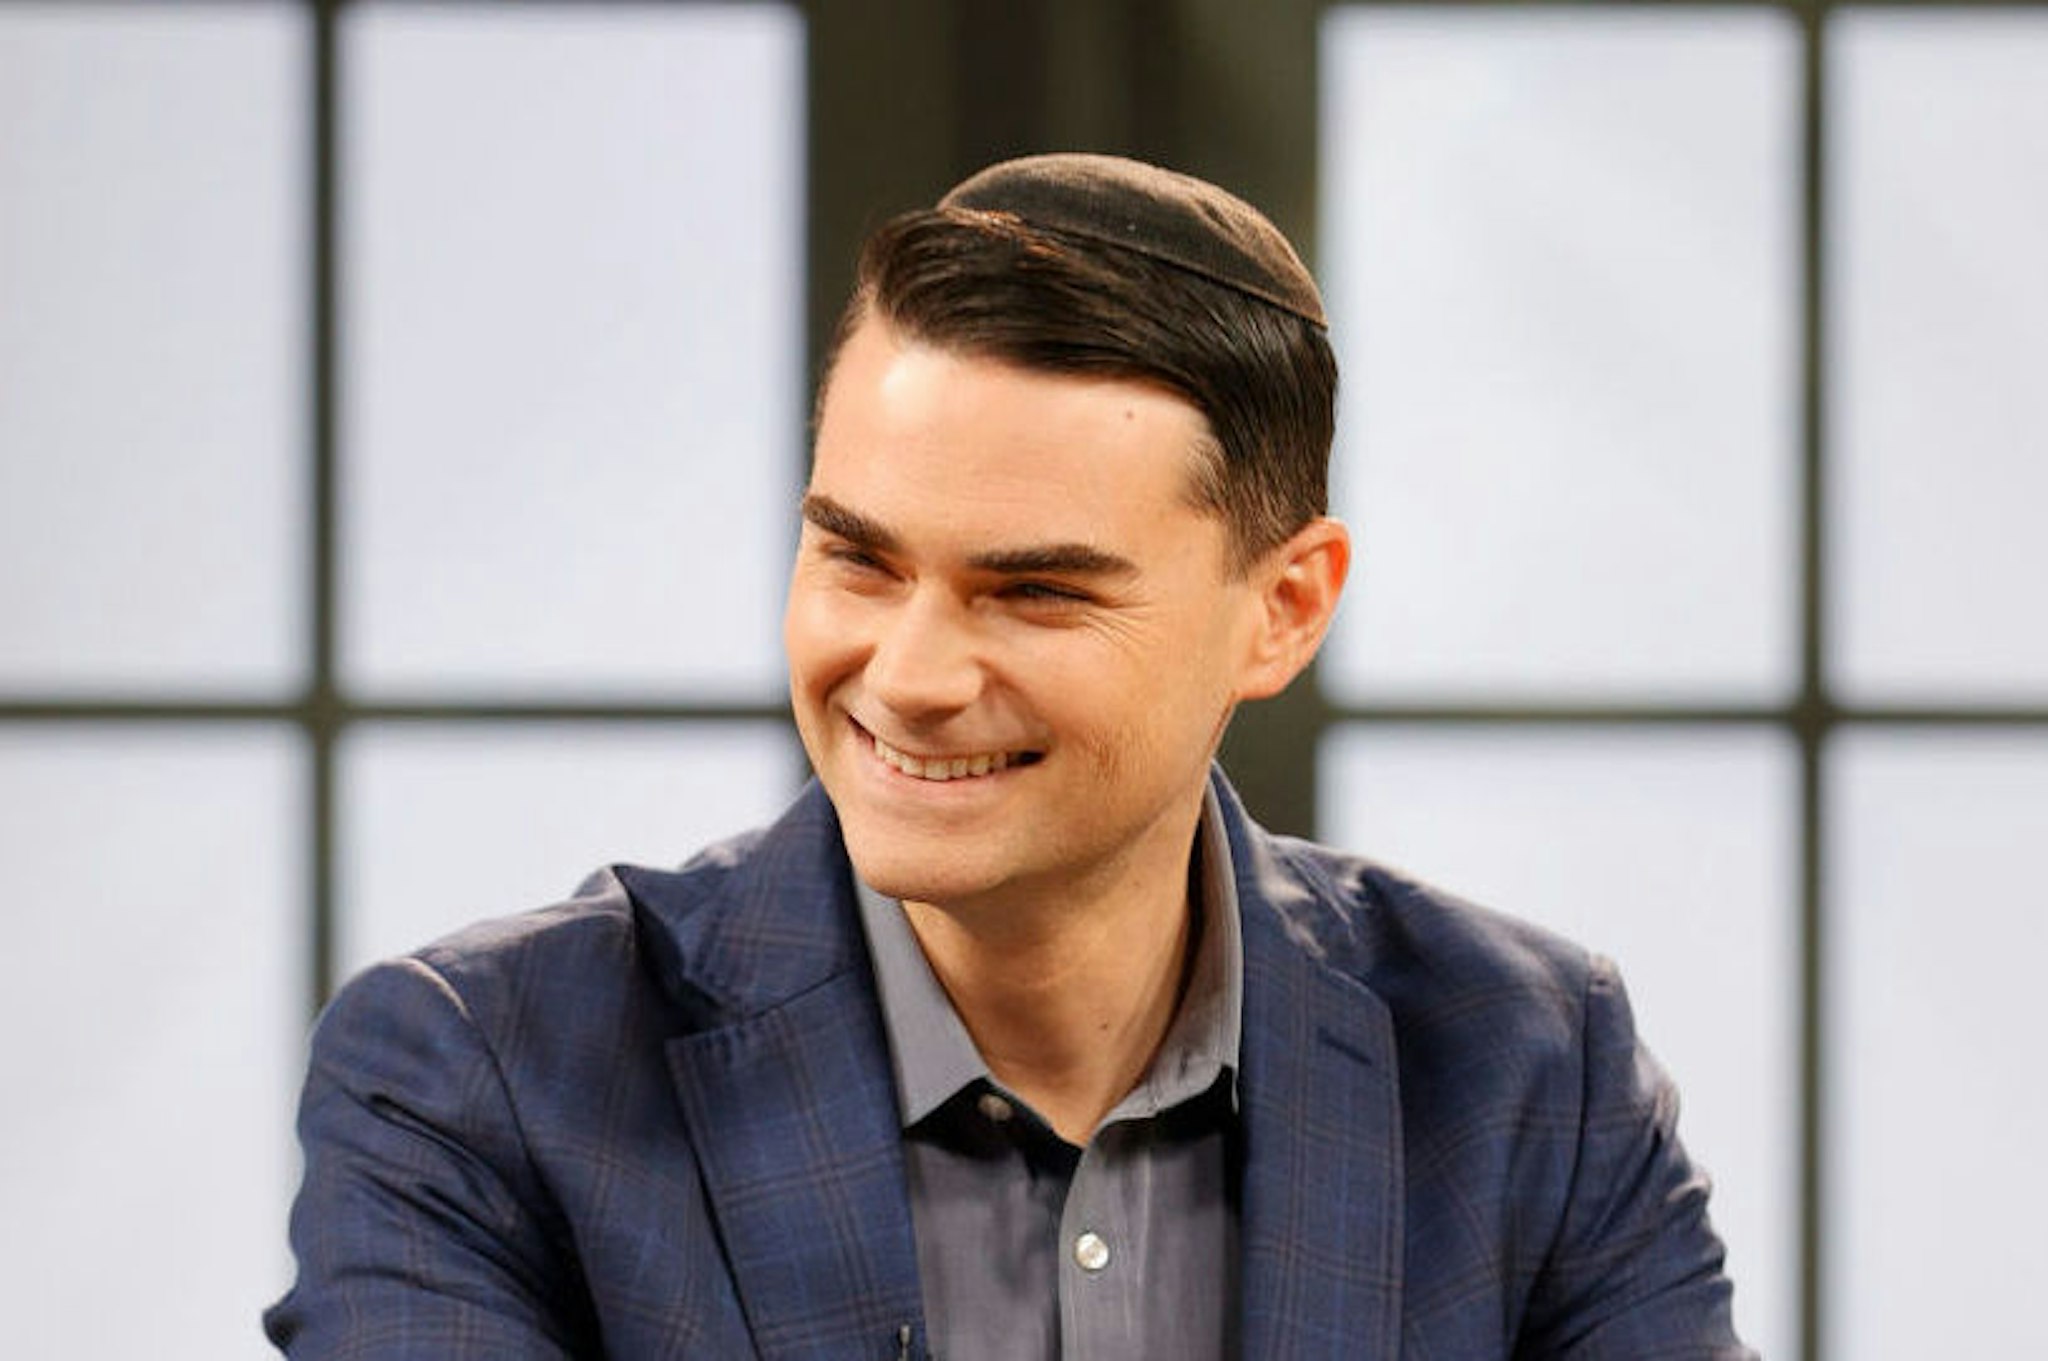 NASHVILLE, TENNESSEE - MARCH 17: American commentator Ben Shapiro is seen on set during a taping of "Candace" on March 17, 2021 in Nashville, Tennessee. The show will air on Friday, March 19, 2021. (Jason Kempin/Getty Images)